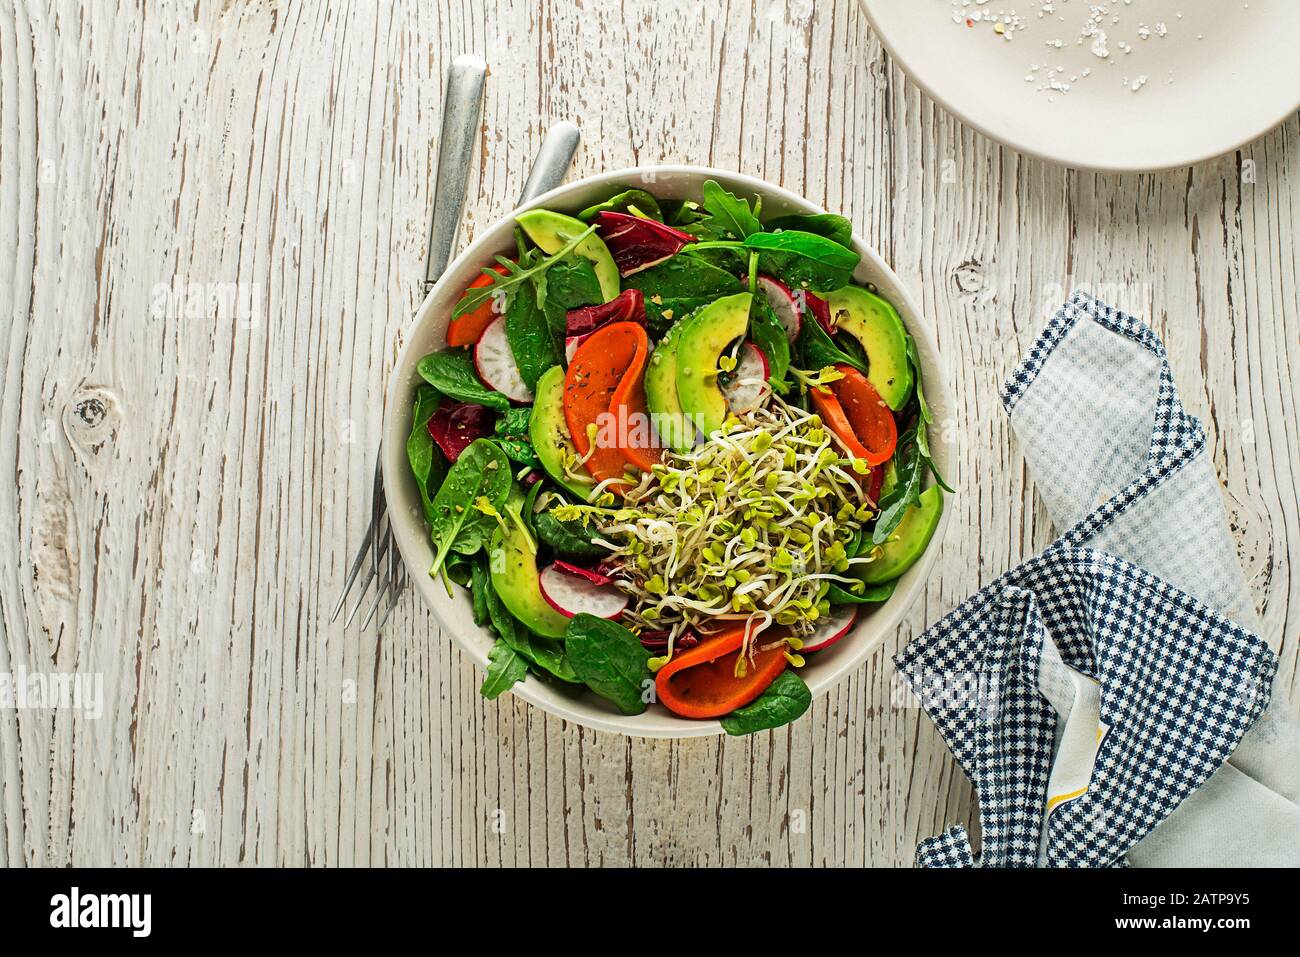 Healthy green salad meal with alfalfa sprouts, avocado and fruit on wooden background Stock Photo